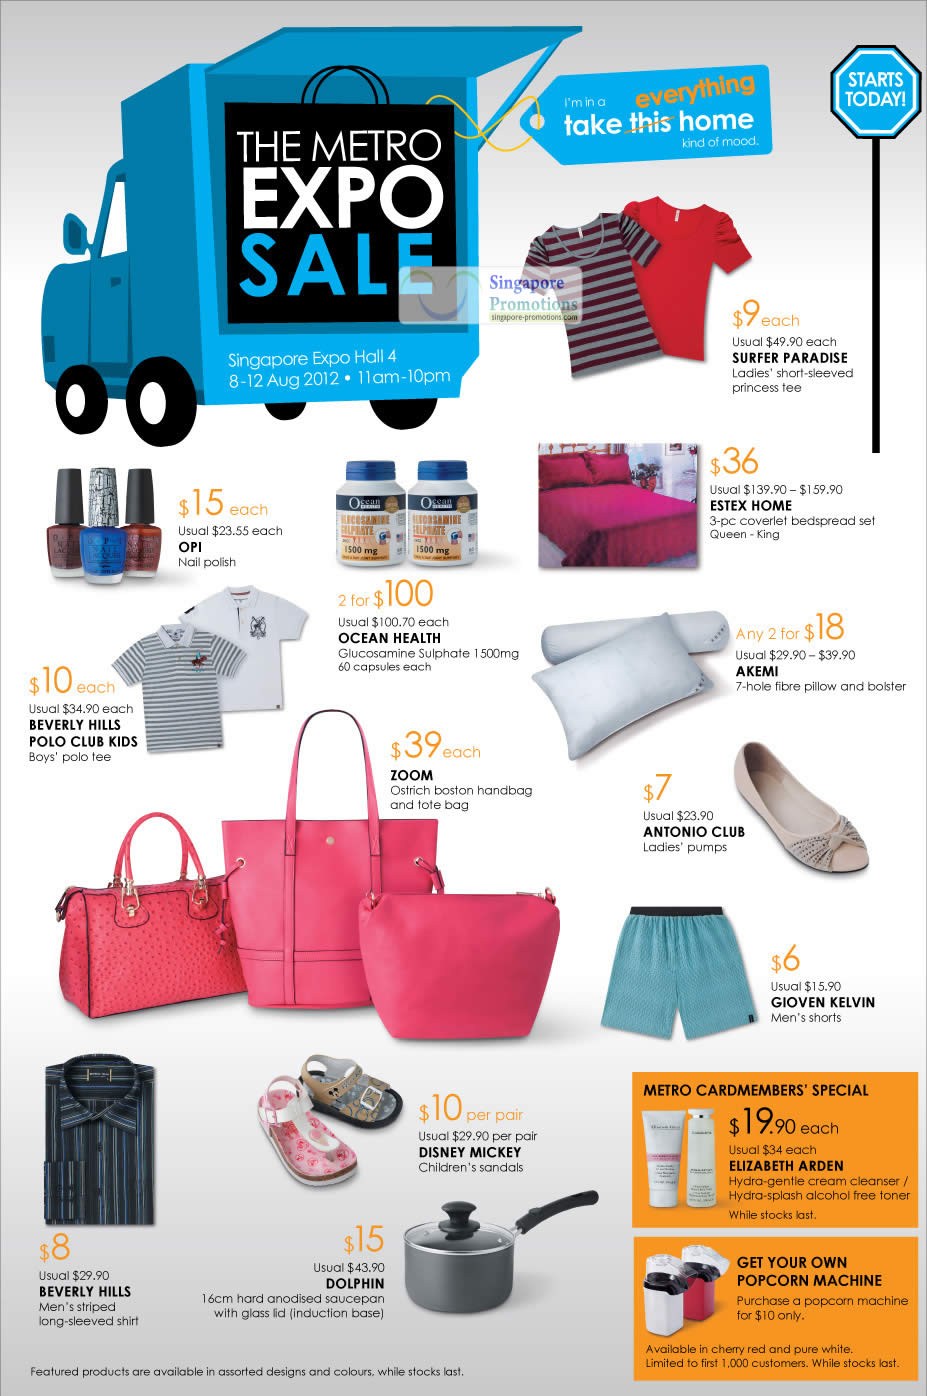 Featured image for Metro Expo Sale @ Singapore Expo 8 - 12 Aug 2012